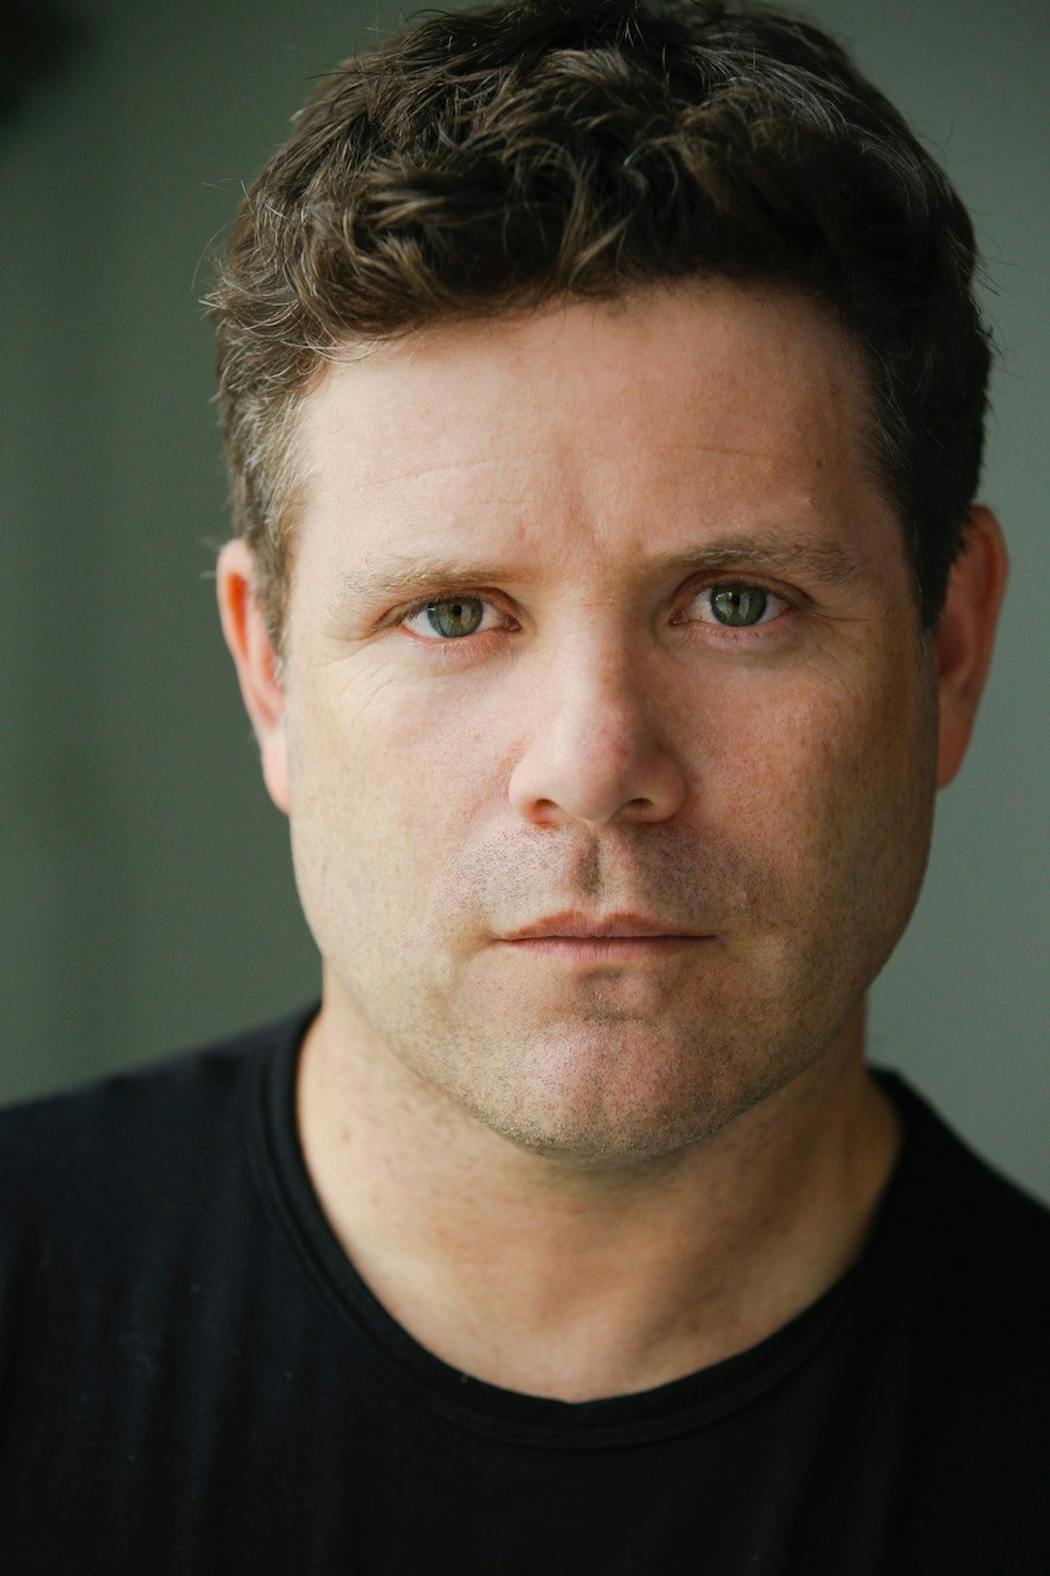 Sean Astin will be in Minneapolis Saturday and Sunday to chat and sign autographs at Twin Cities Con.